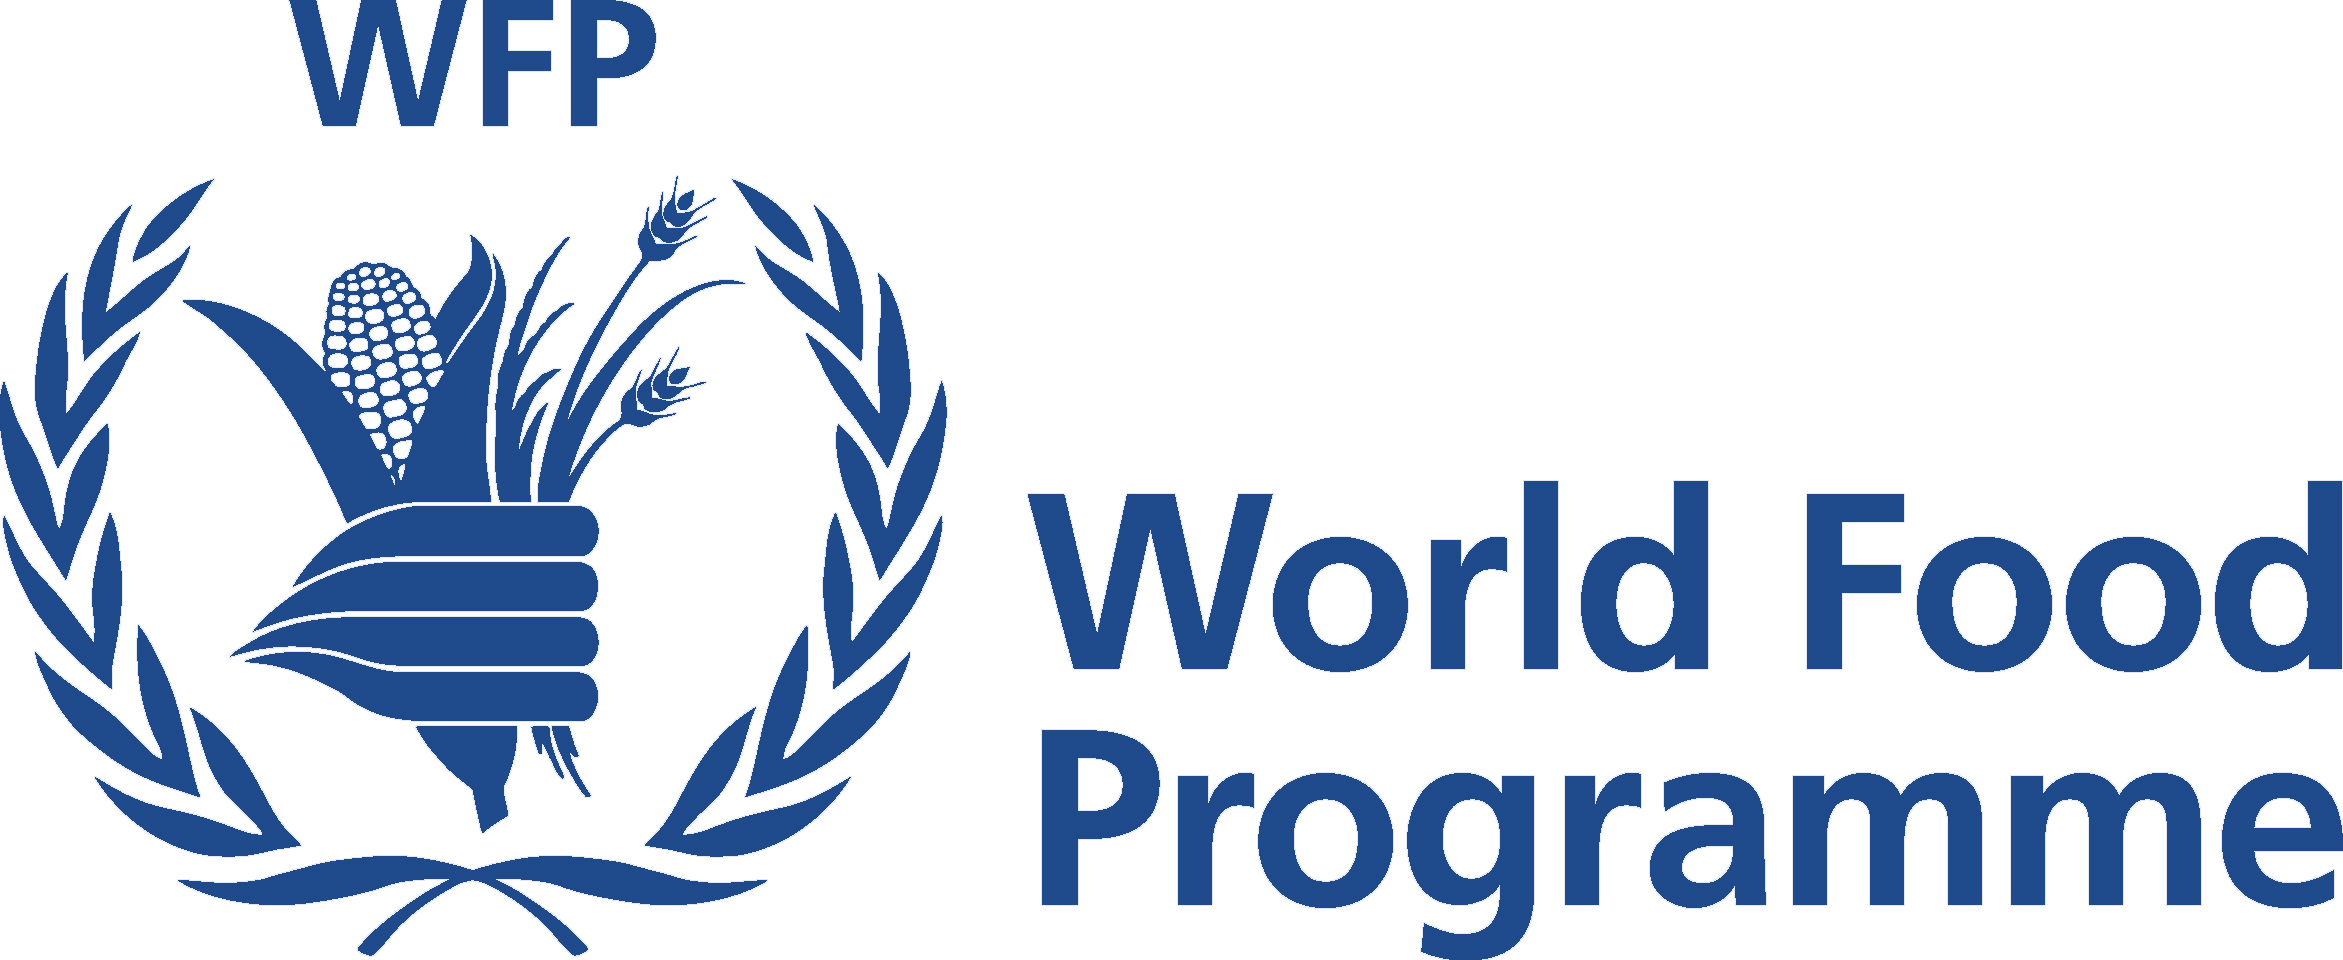 The official logo of the United Nations World Food Programme